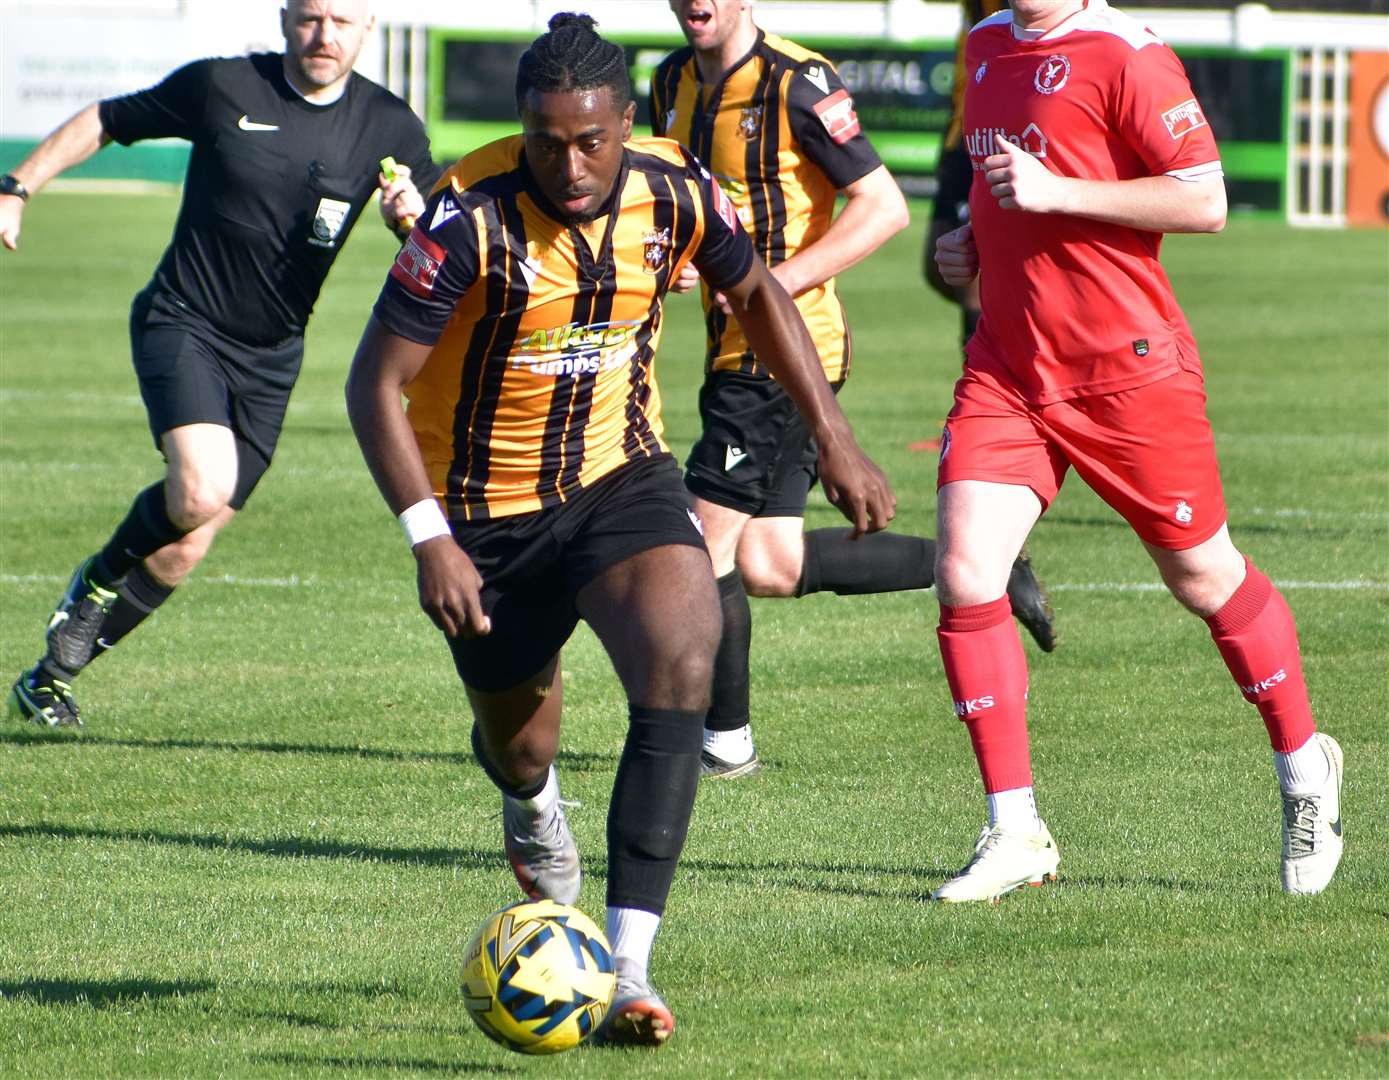 Ira Jackson scored at the weekend for Folkestone in their FA Trophy triumph over Beaconsfield Town. Picture: Randolph File